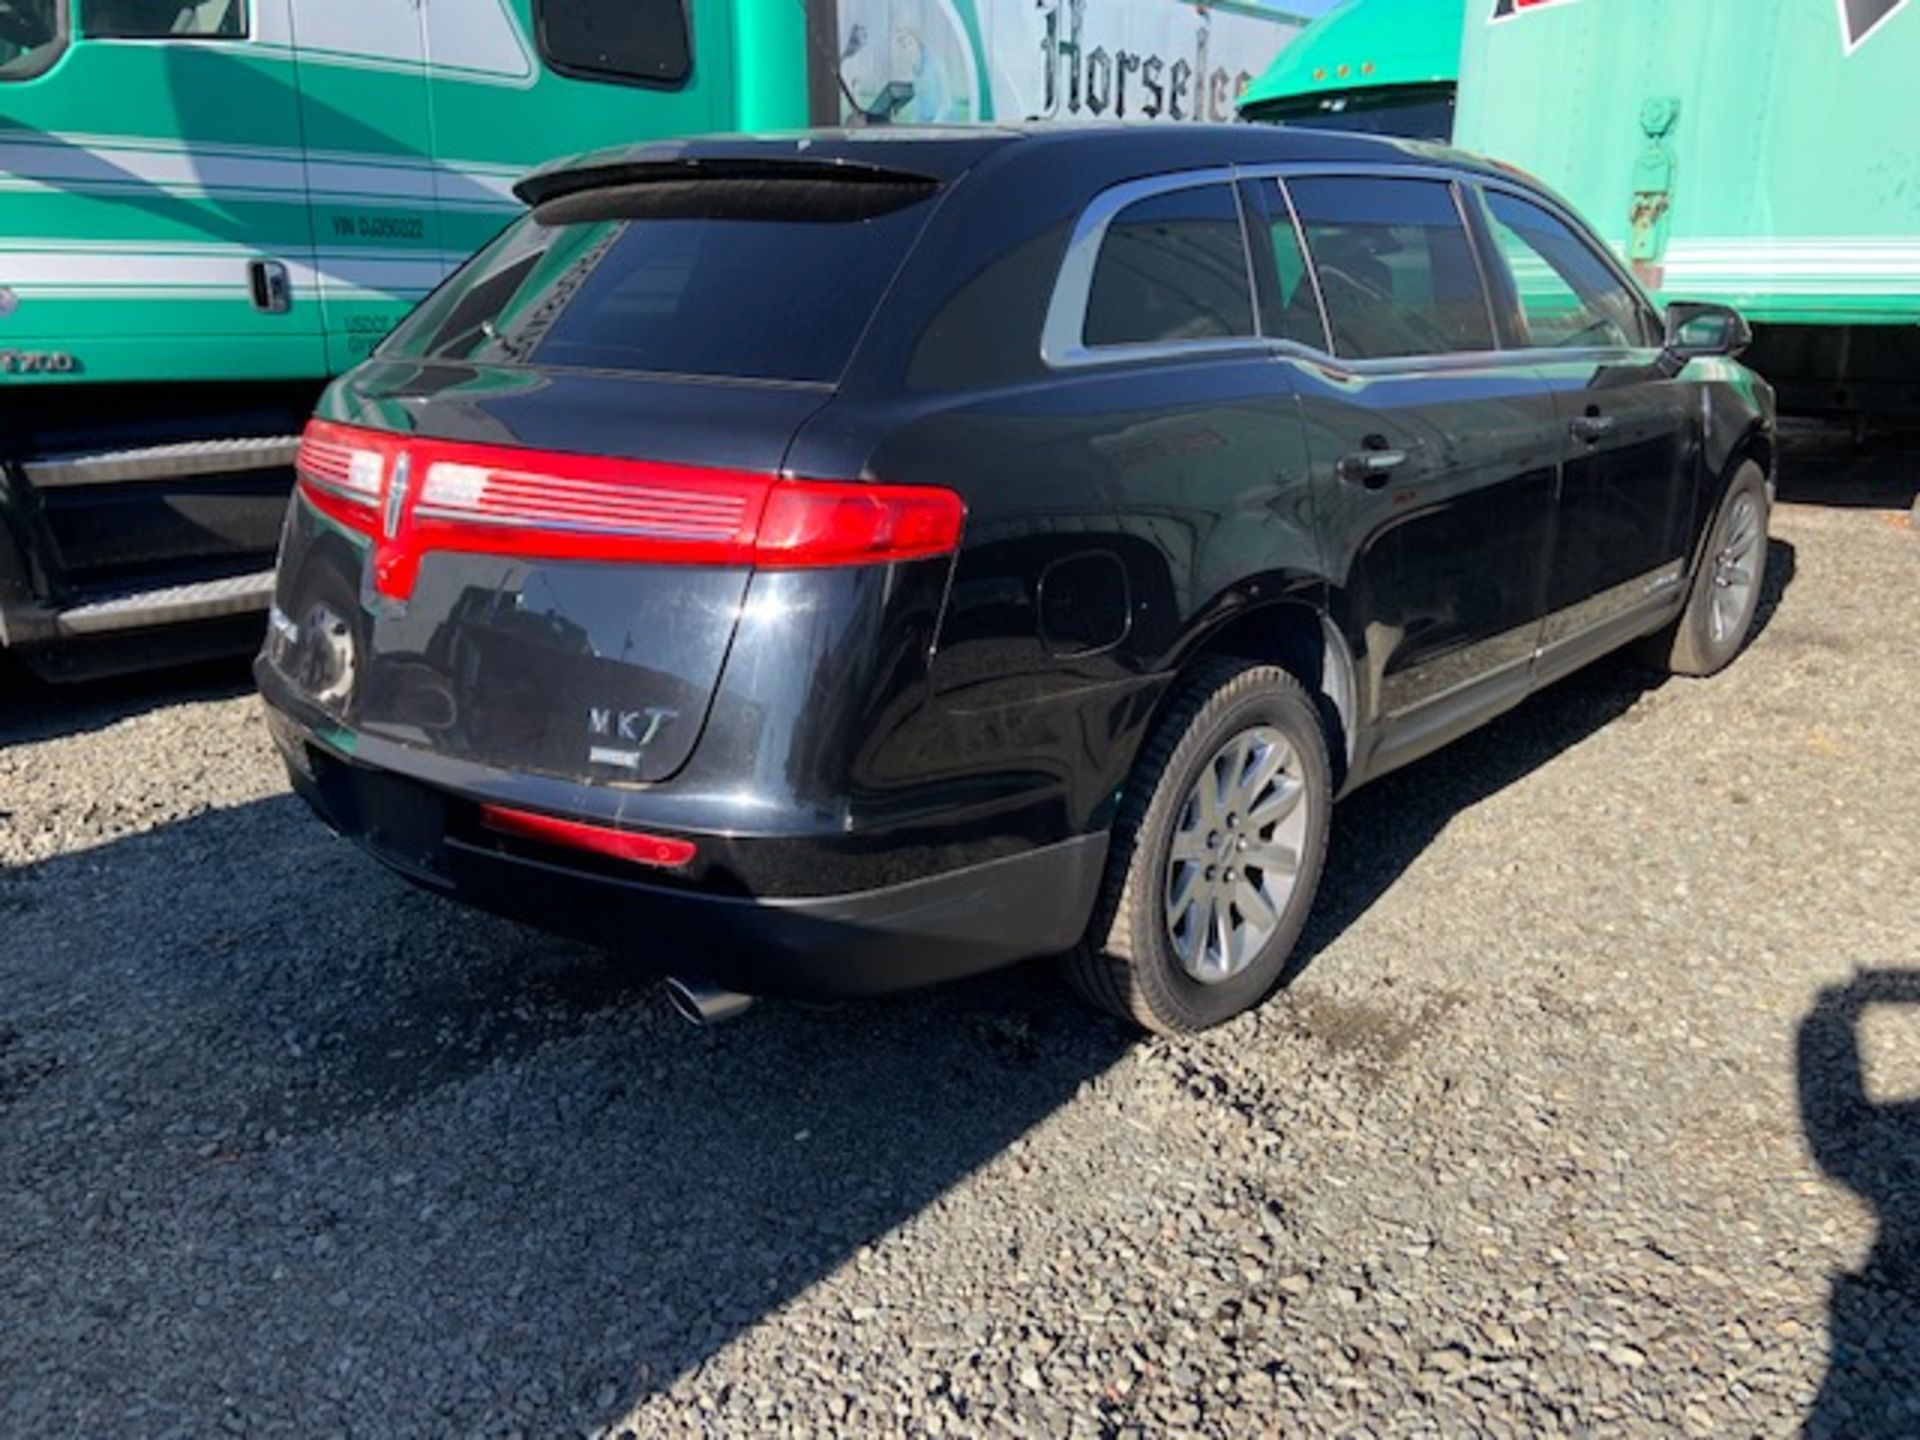 2017 Lincoln MKT; VIN: 2LMHJ5NK7HBL01379; Mileage 91,984 Miles - Image 2 of 8